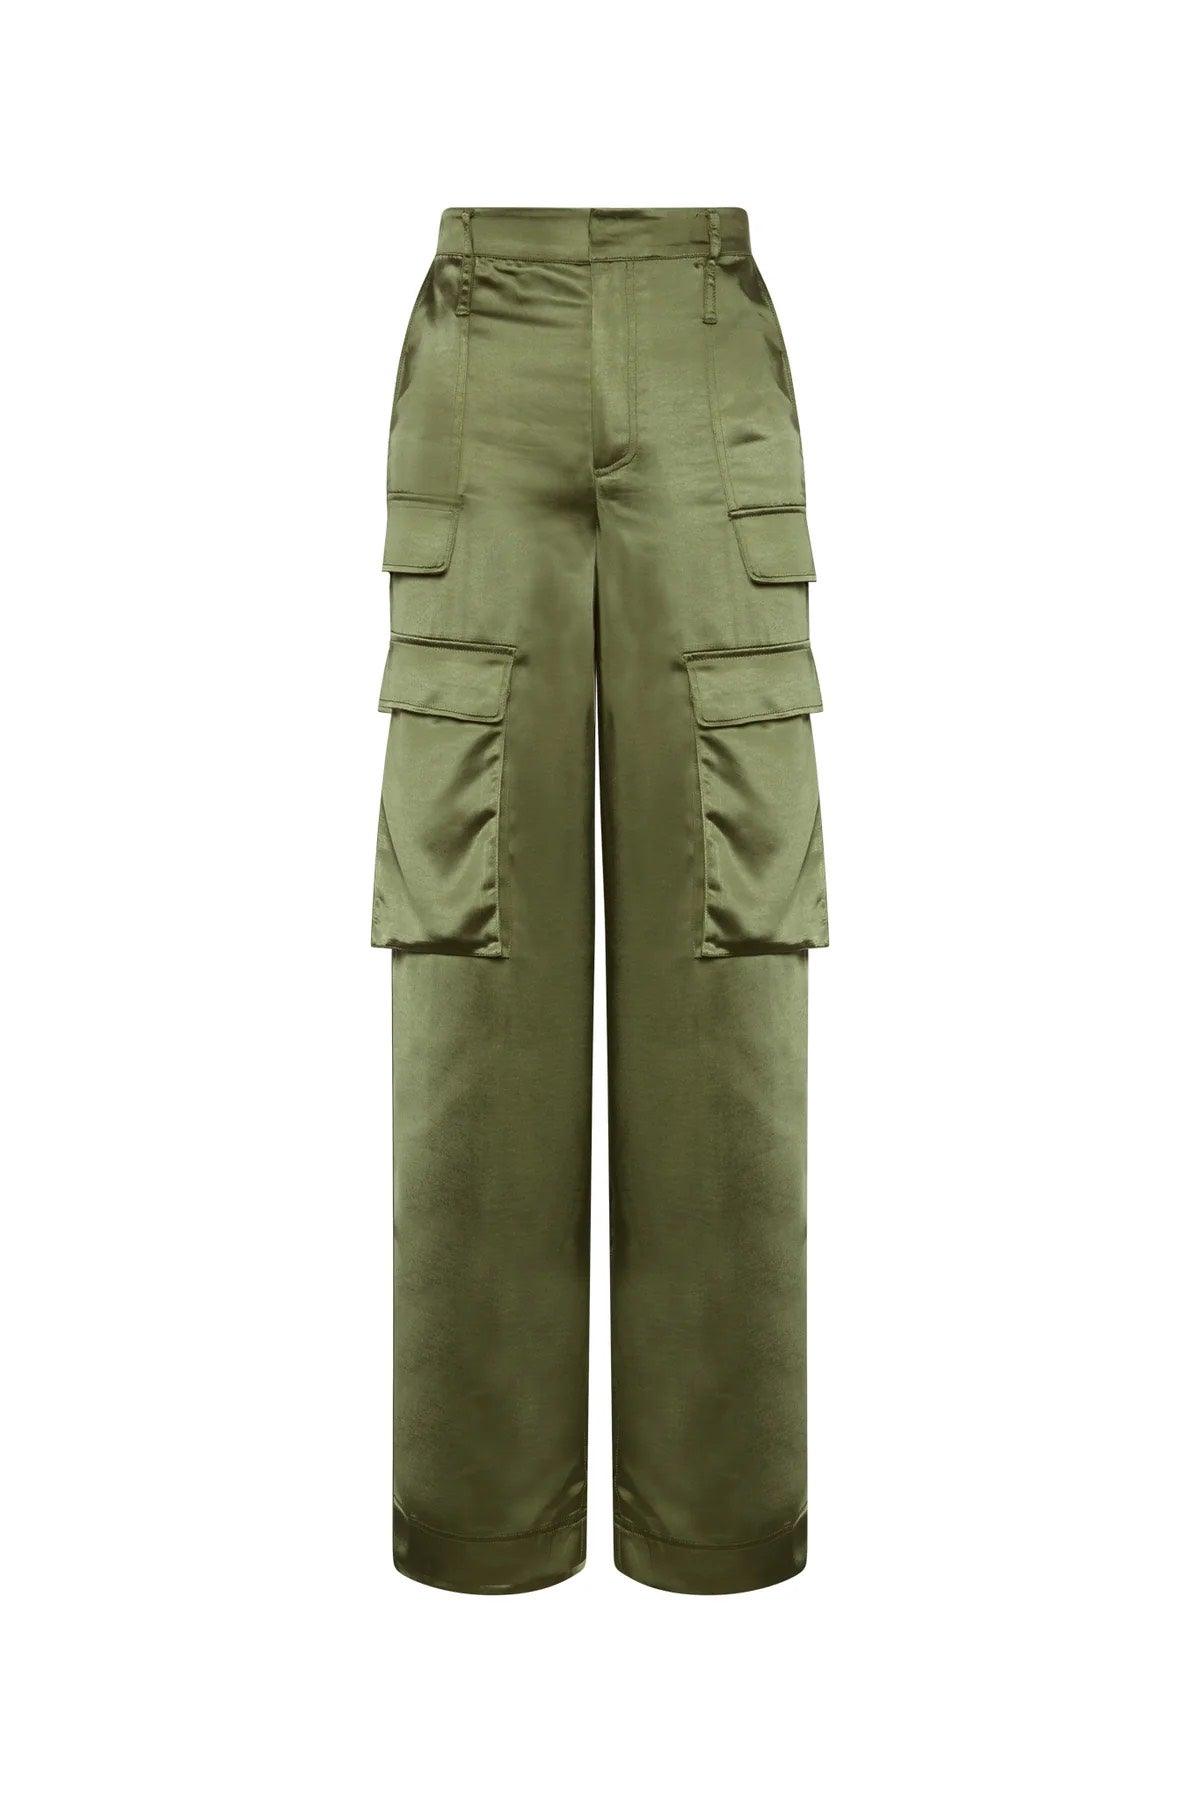 Army Green Cargo Pant by Catherine Gee